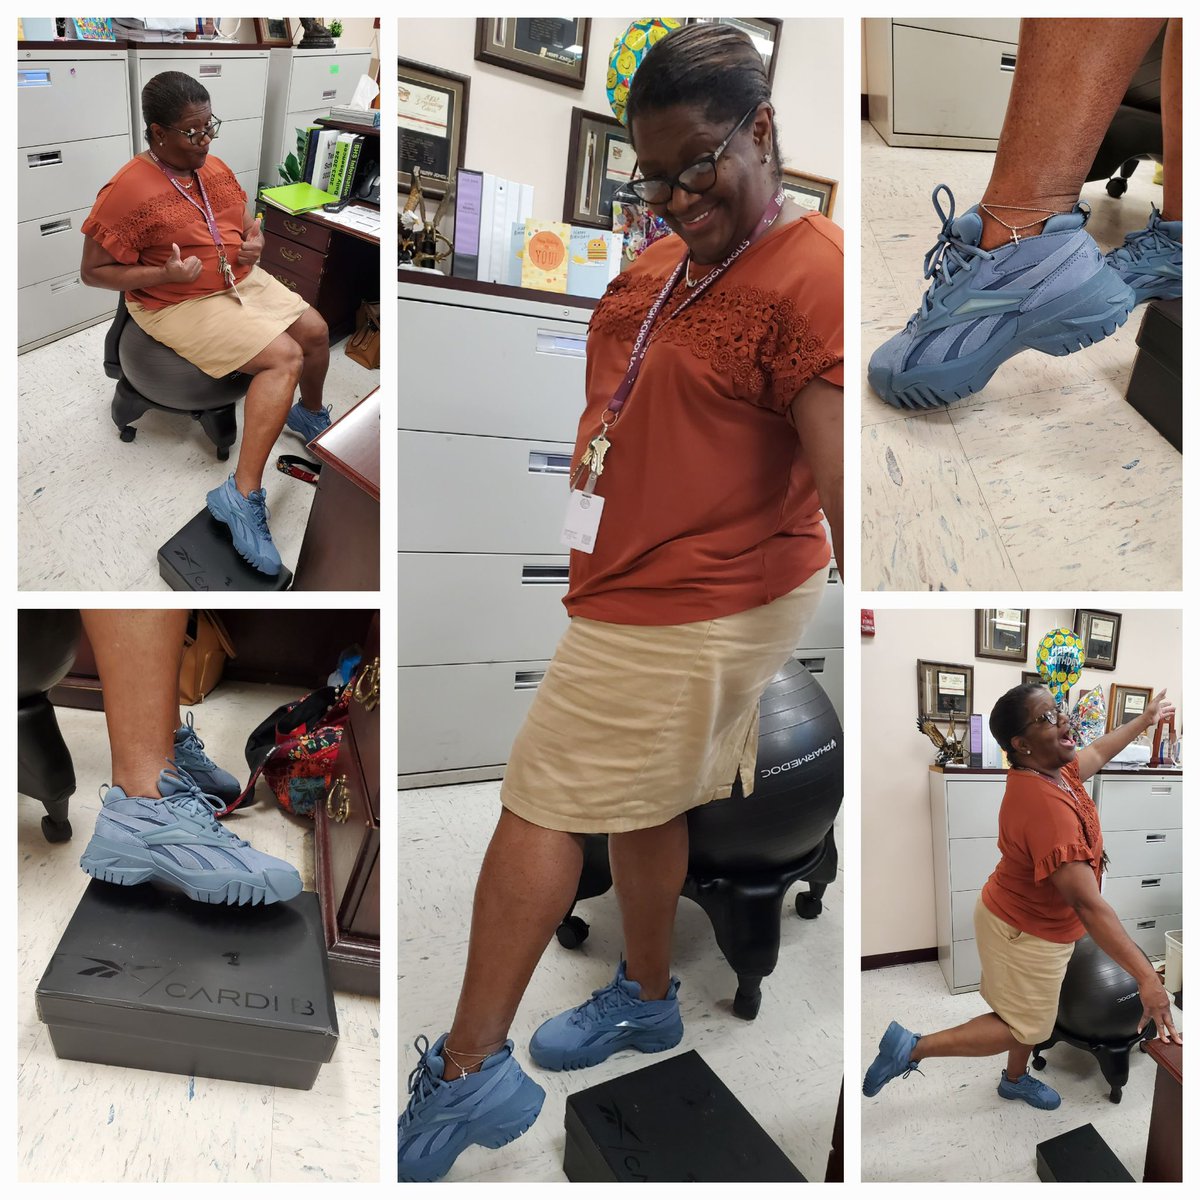 Sometimes you spill the tea... on your shoes! @Community_Sch @BrandonHSEagles are fortunate to have community partners who have donated shoes to the pantry! Our @iamcardib shoes are a hit and came in clutch!